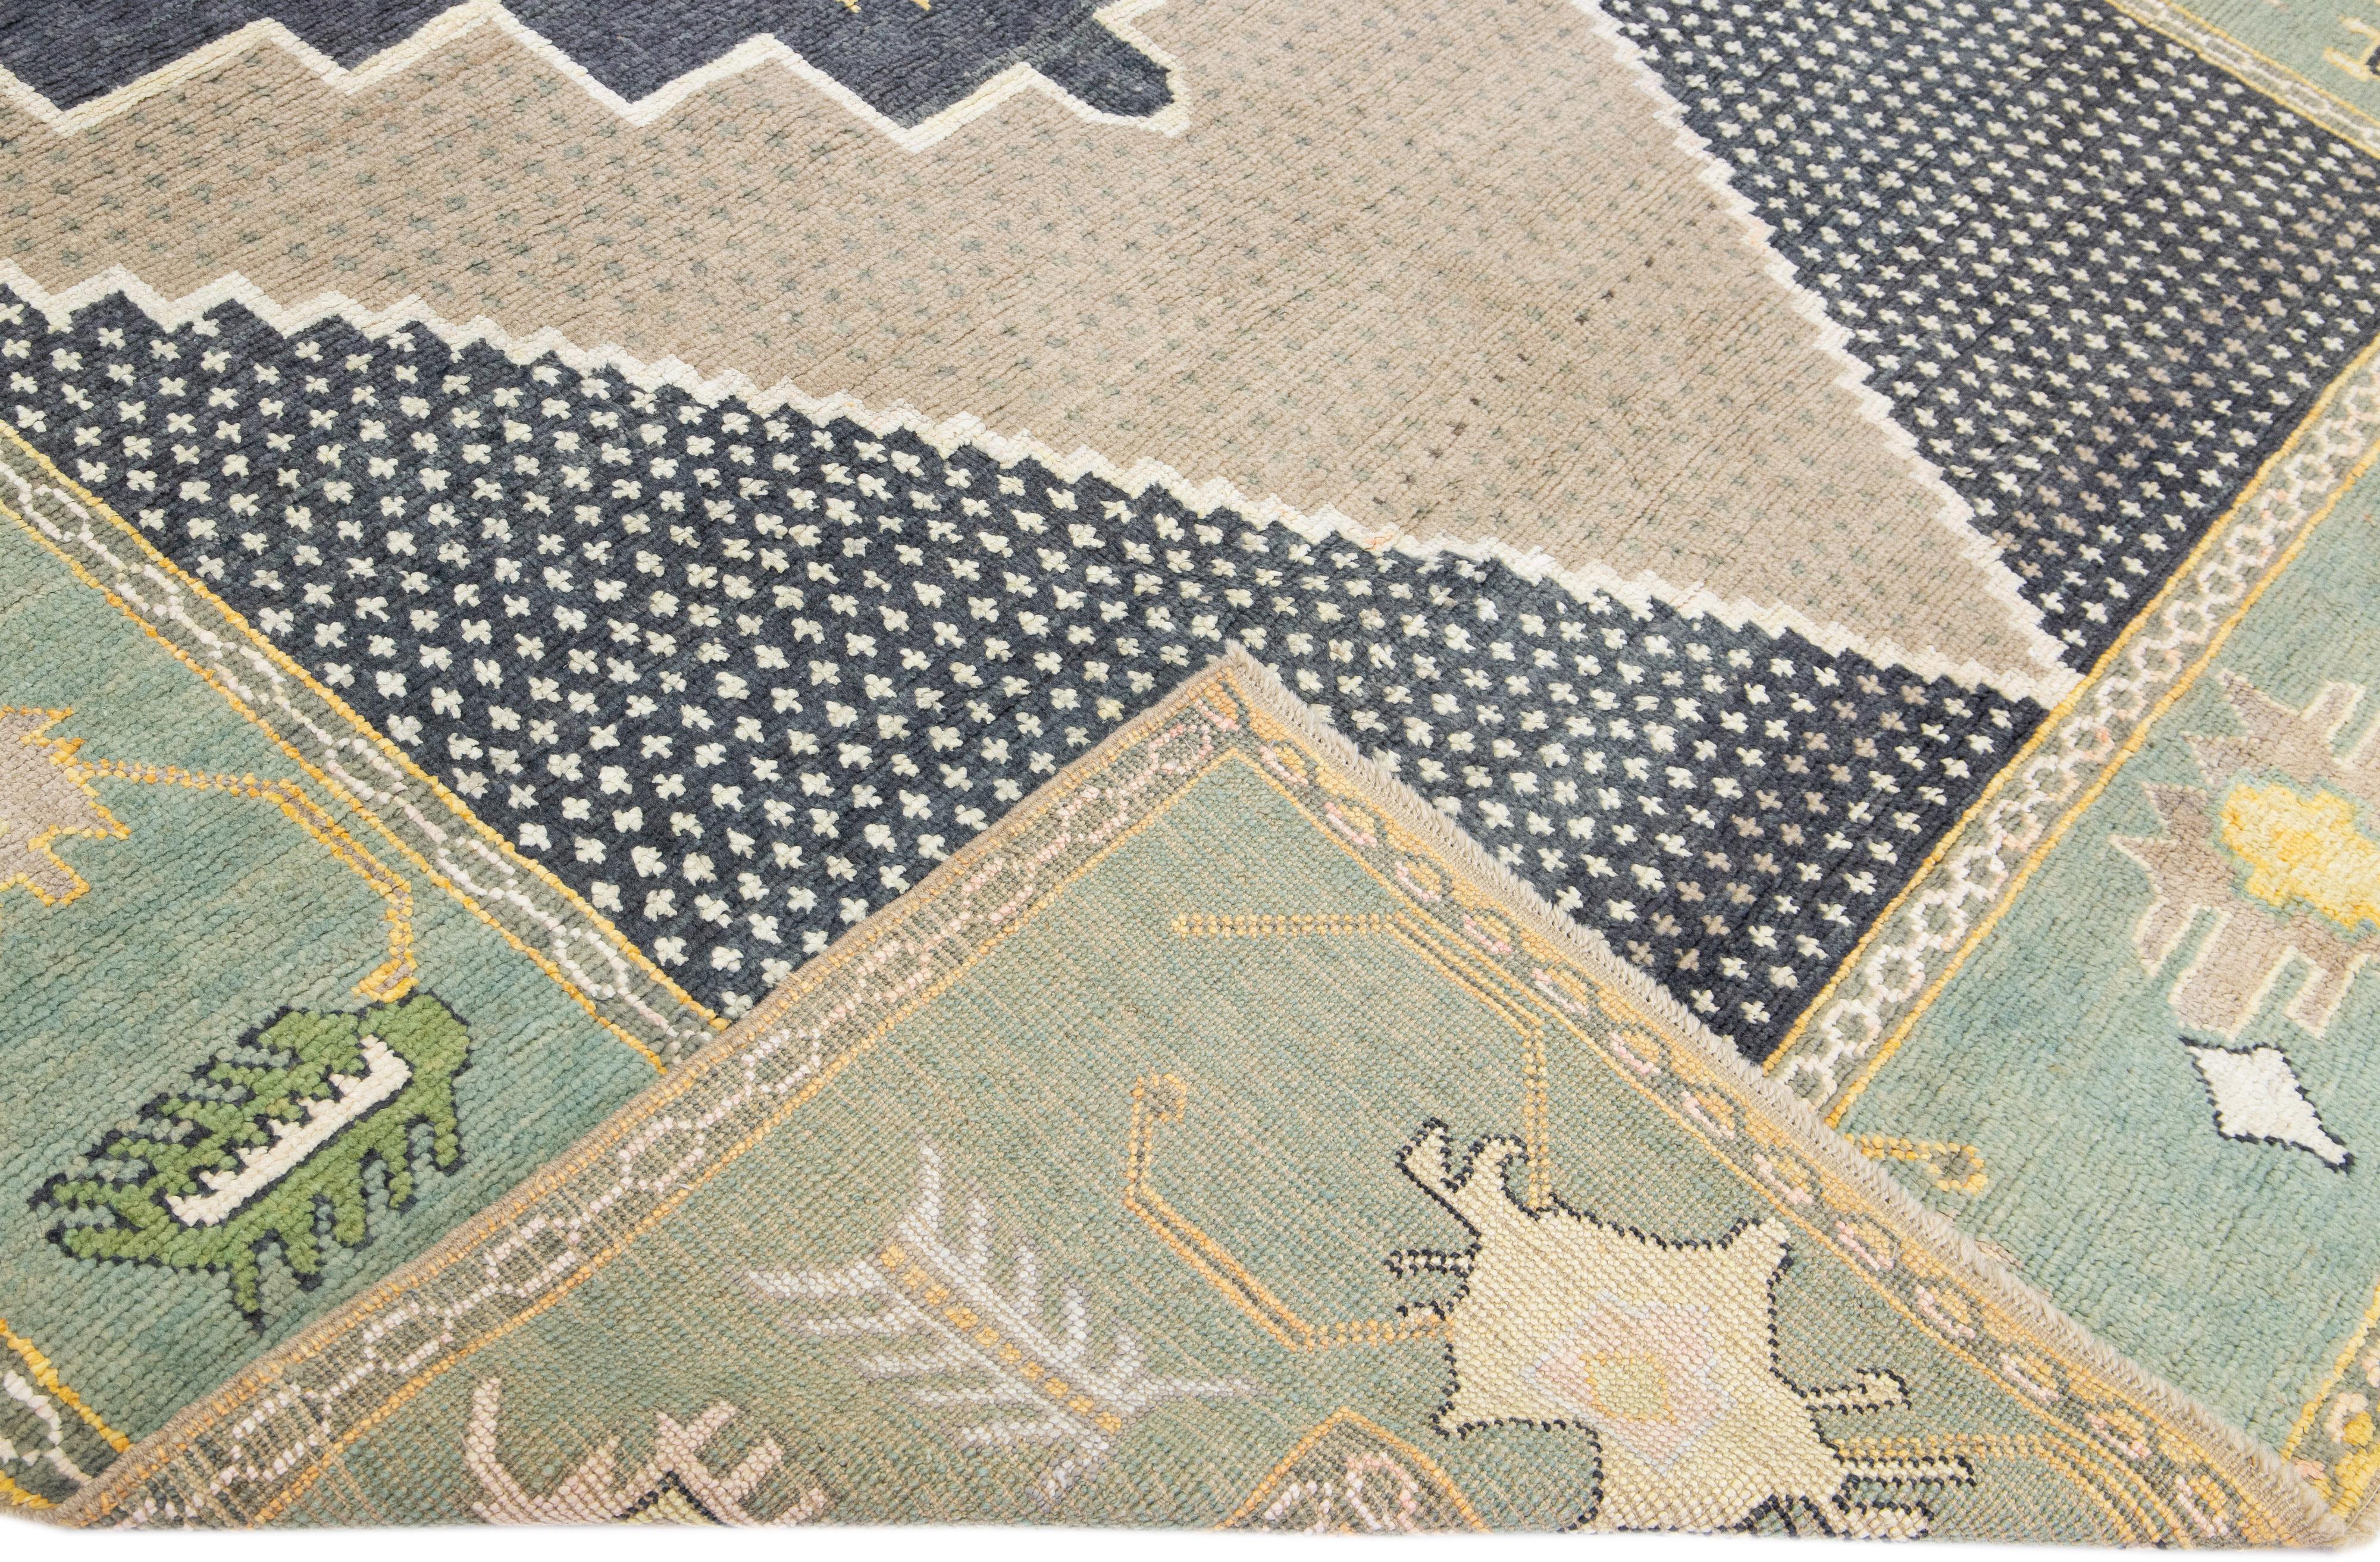 Beautiful modern Oushak hand-knotted wool rug with a tan and gray field. This Oushak rug has a green-designed frame and accents of orange, yellow, and ivory all over a gorgeous geometric medallion design.

This rug measures: 8'3